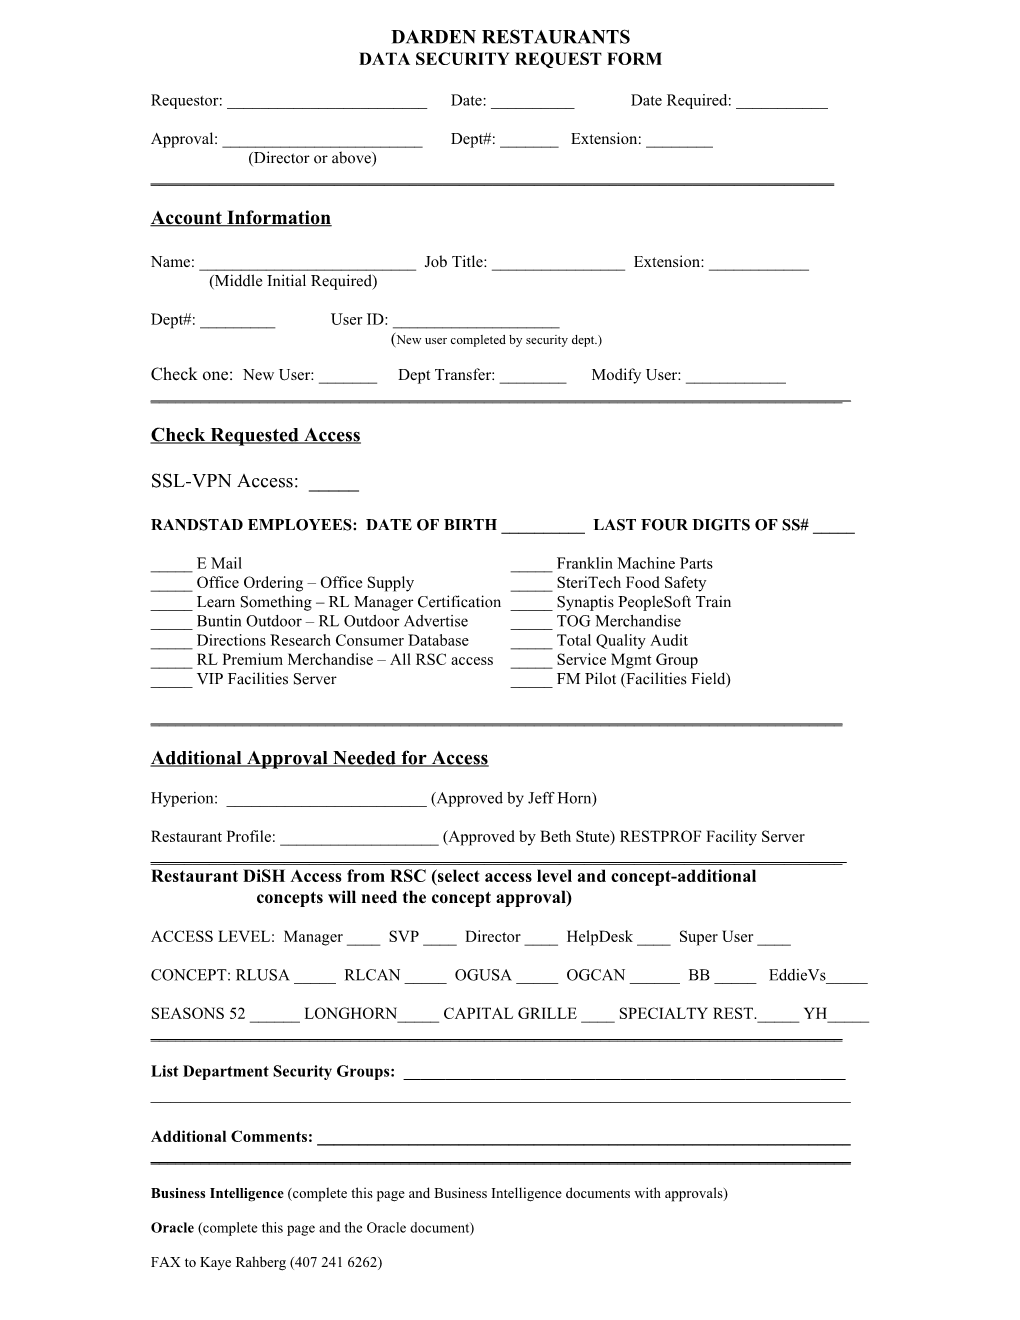 Data Security Request Form